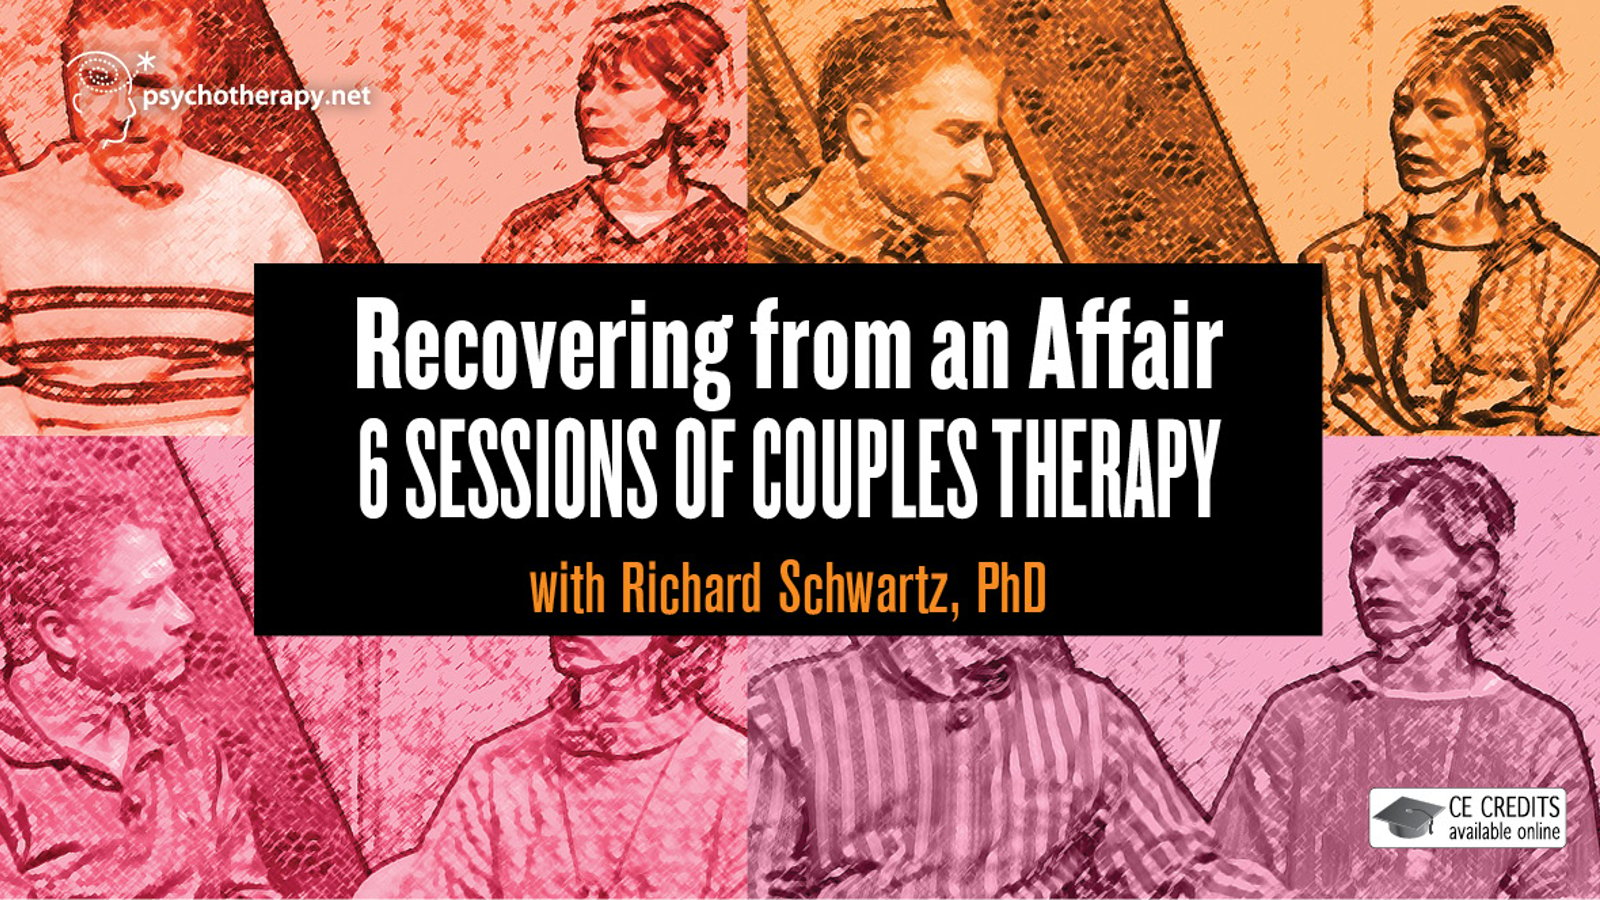 Recovering from an Affair: 6 Sessions of Couples Therapy - With Richard Schwartz